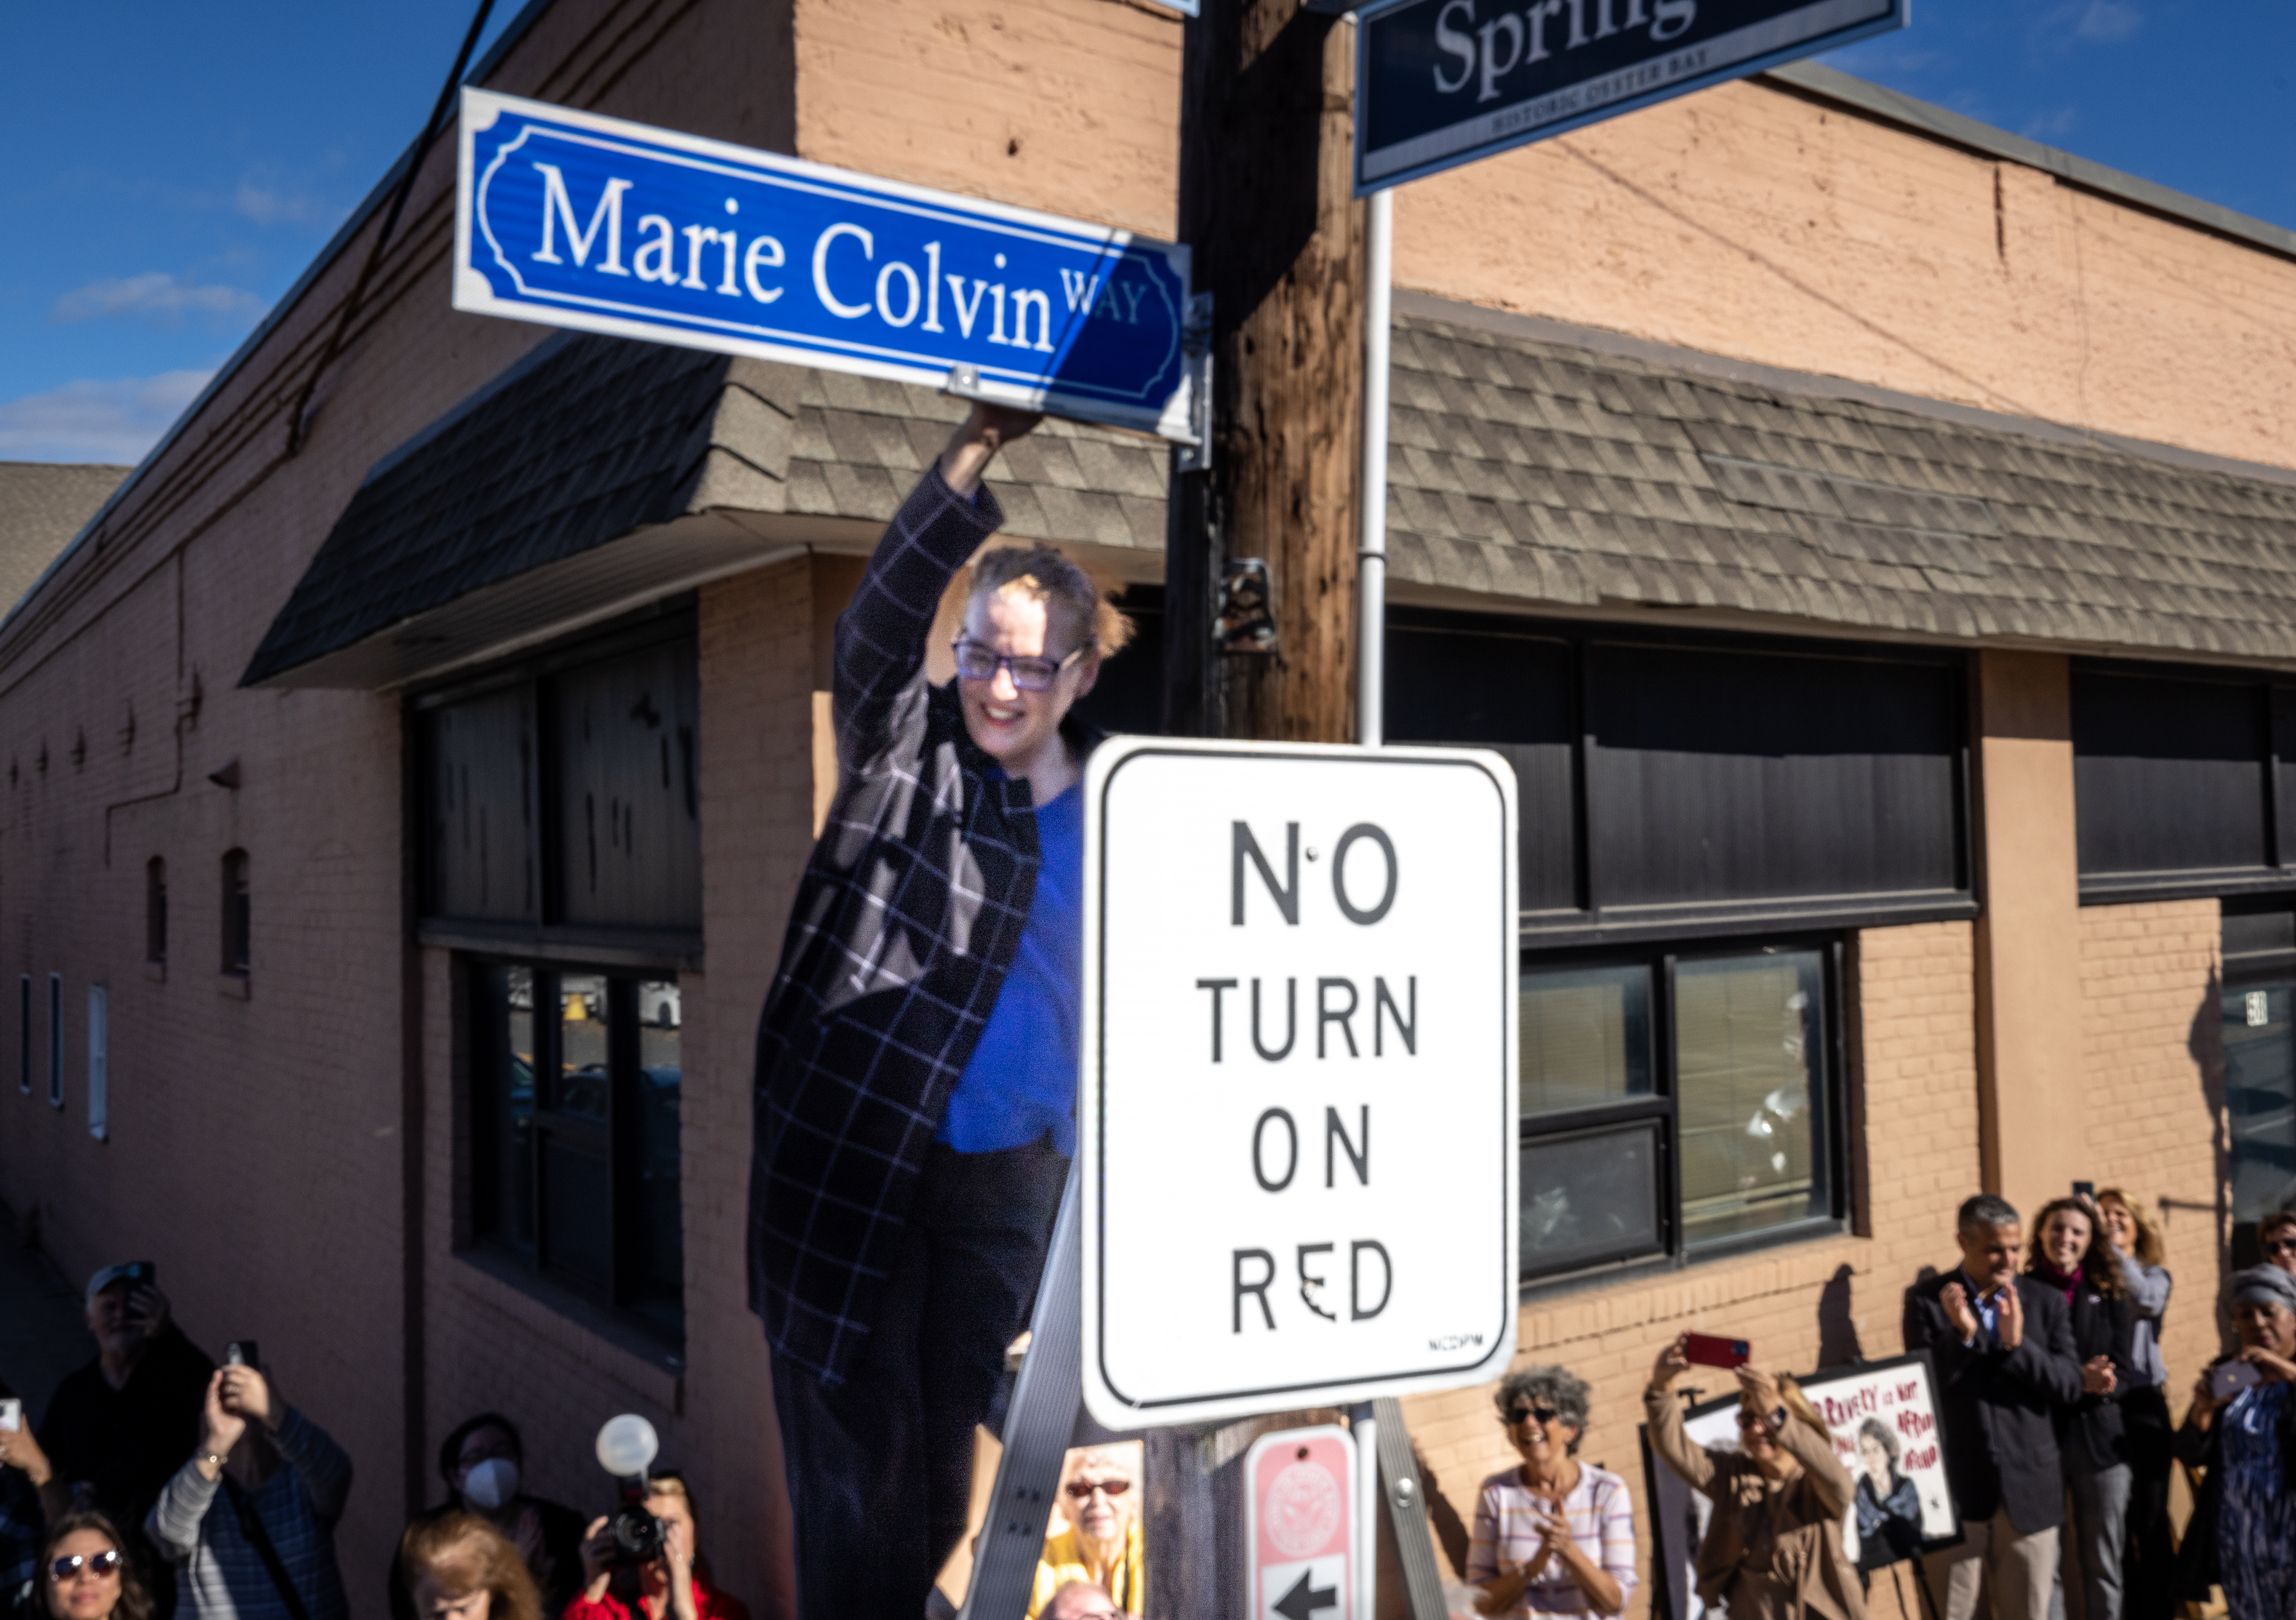 Oyster Bay Street Renaming Ceremony in Honor of Journalist Marie Colvin